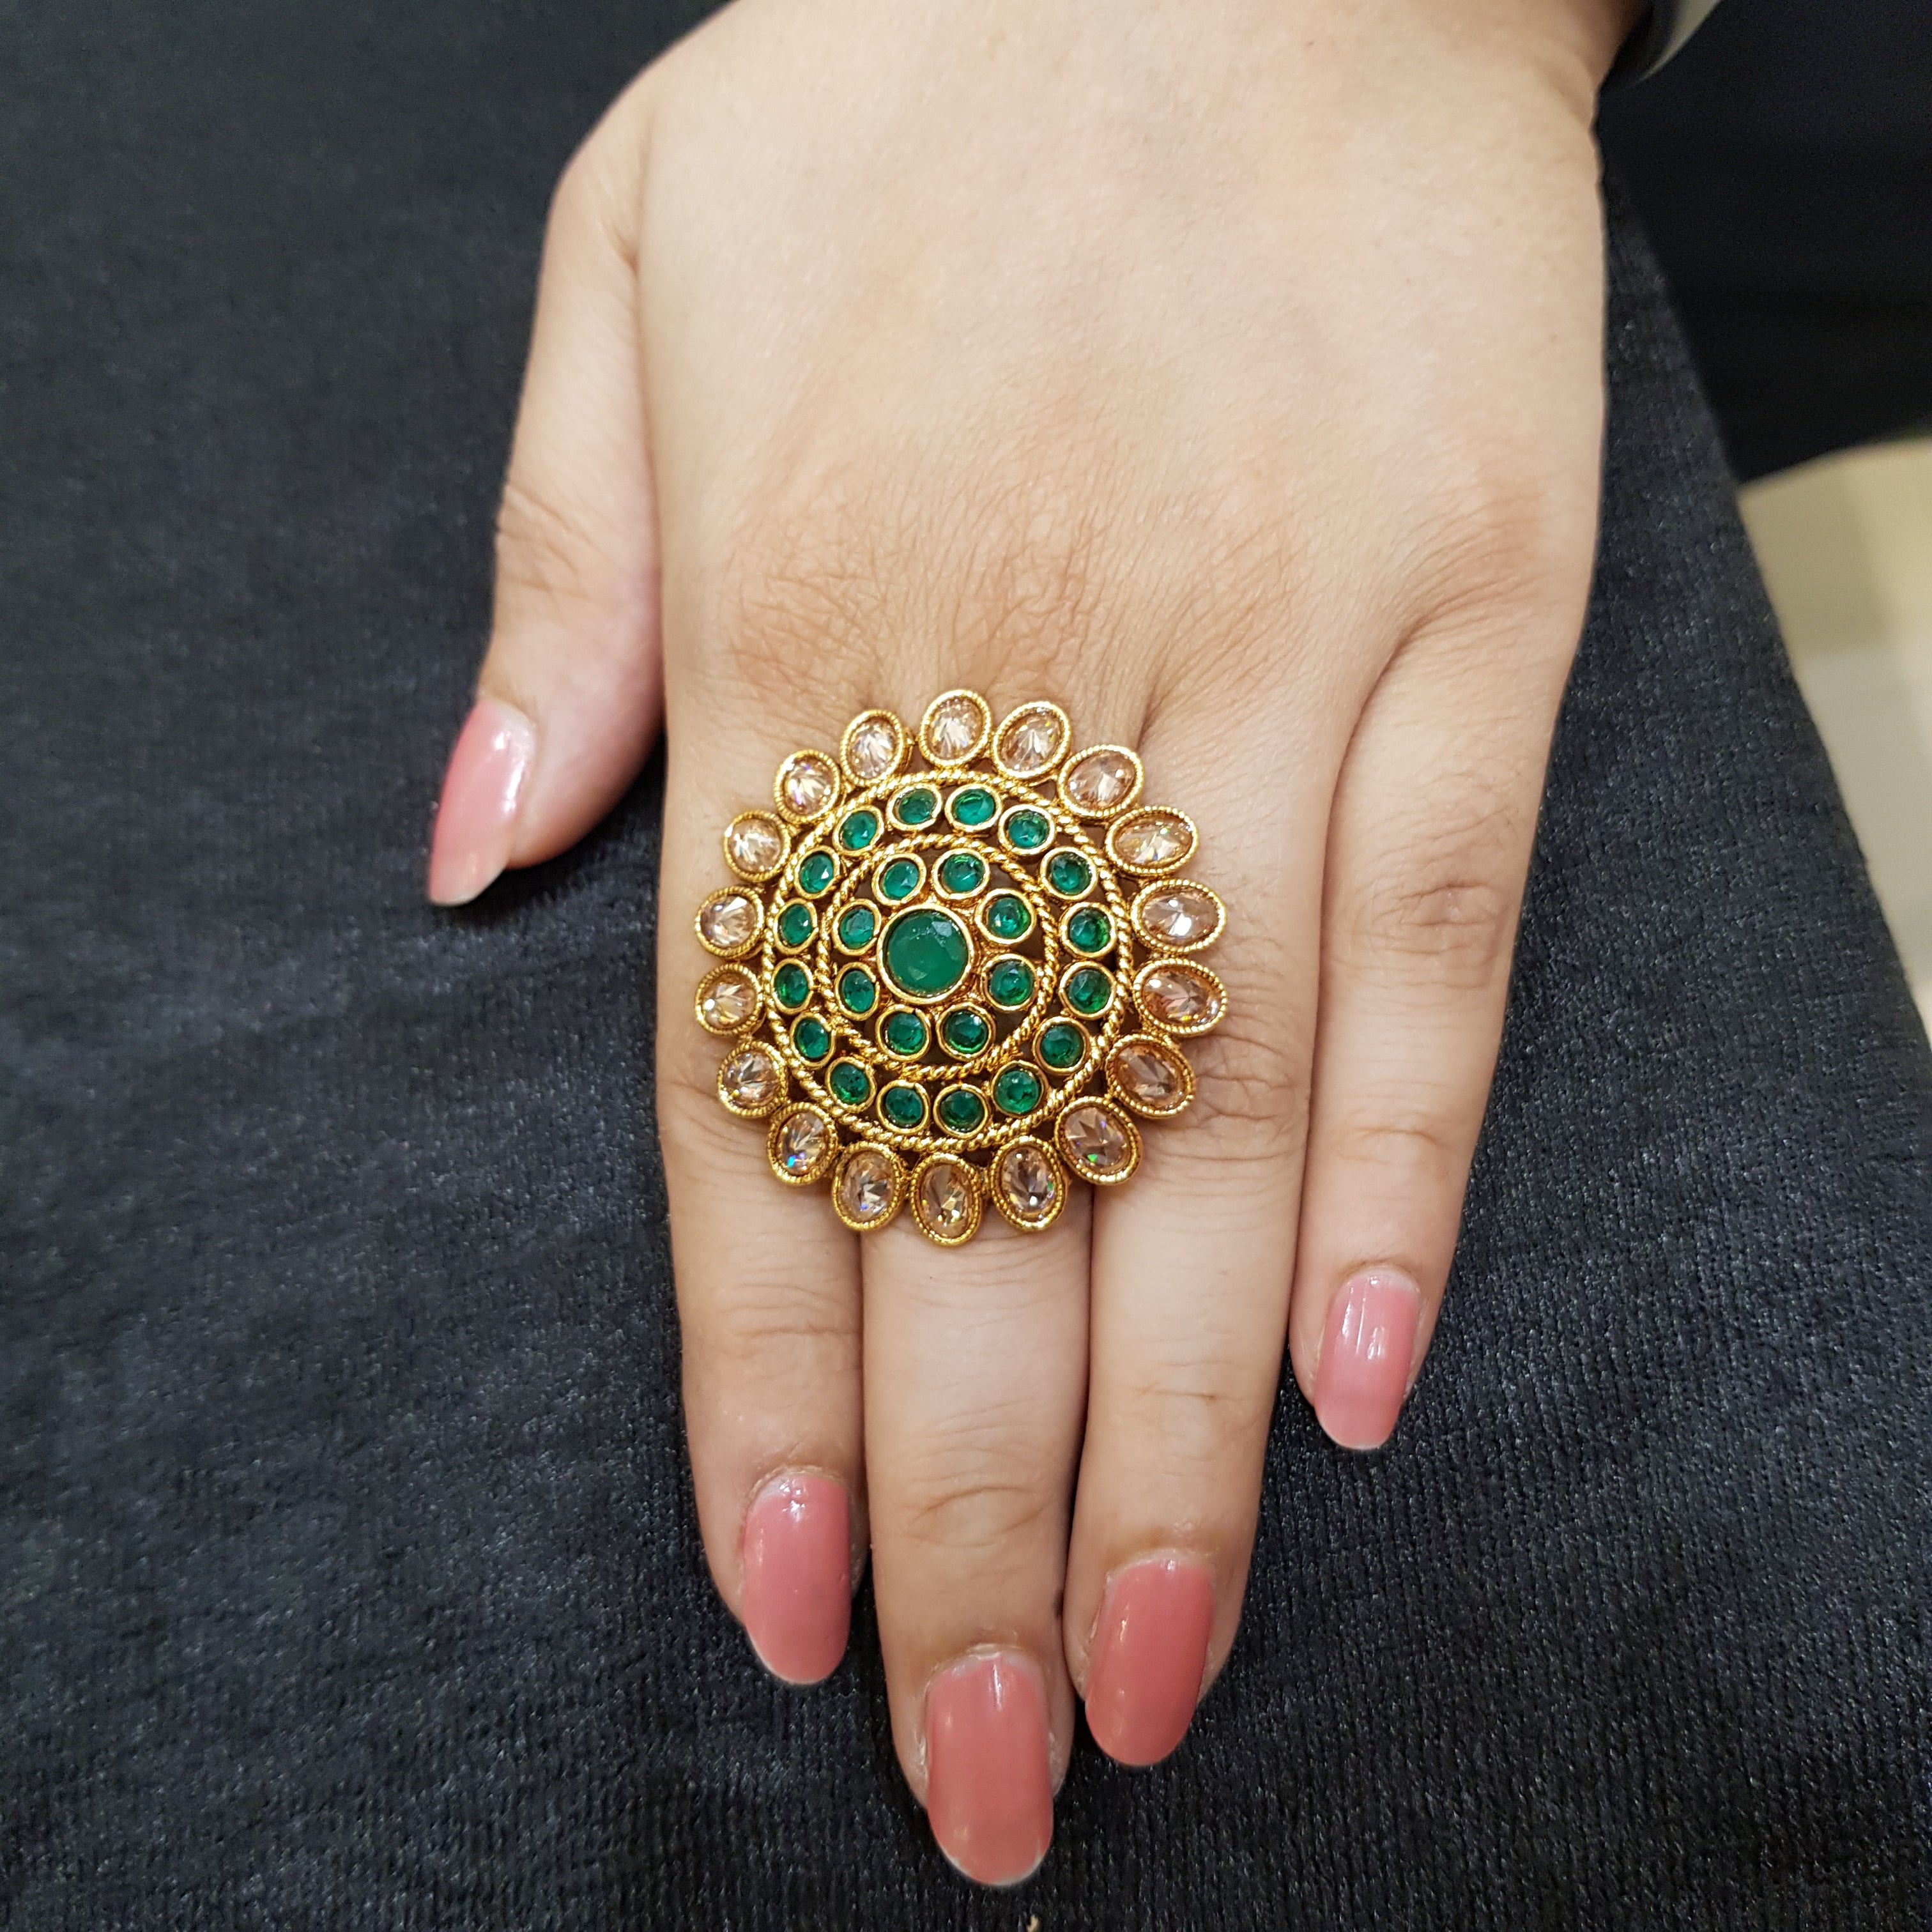 Unisex 22 Carat Gold Casual Wear Ring at Rs 5000 in Thane | ID: 27487616888